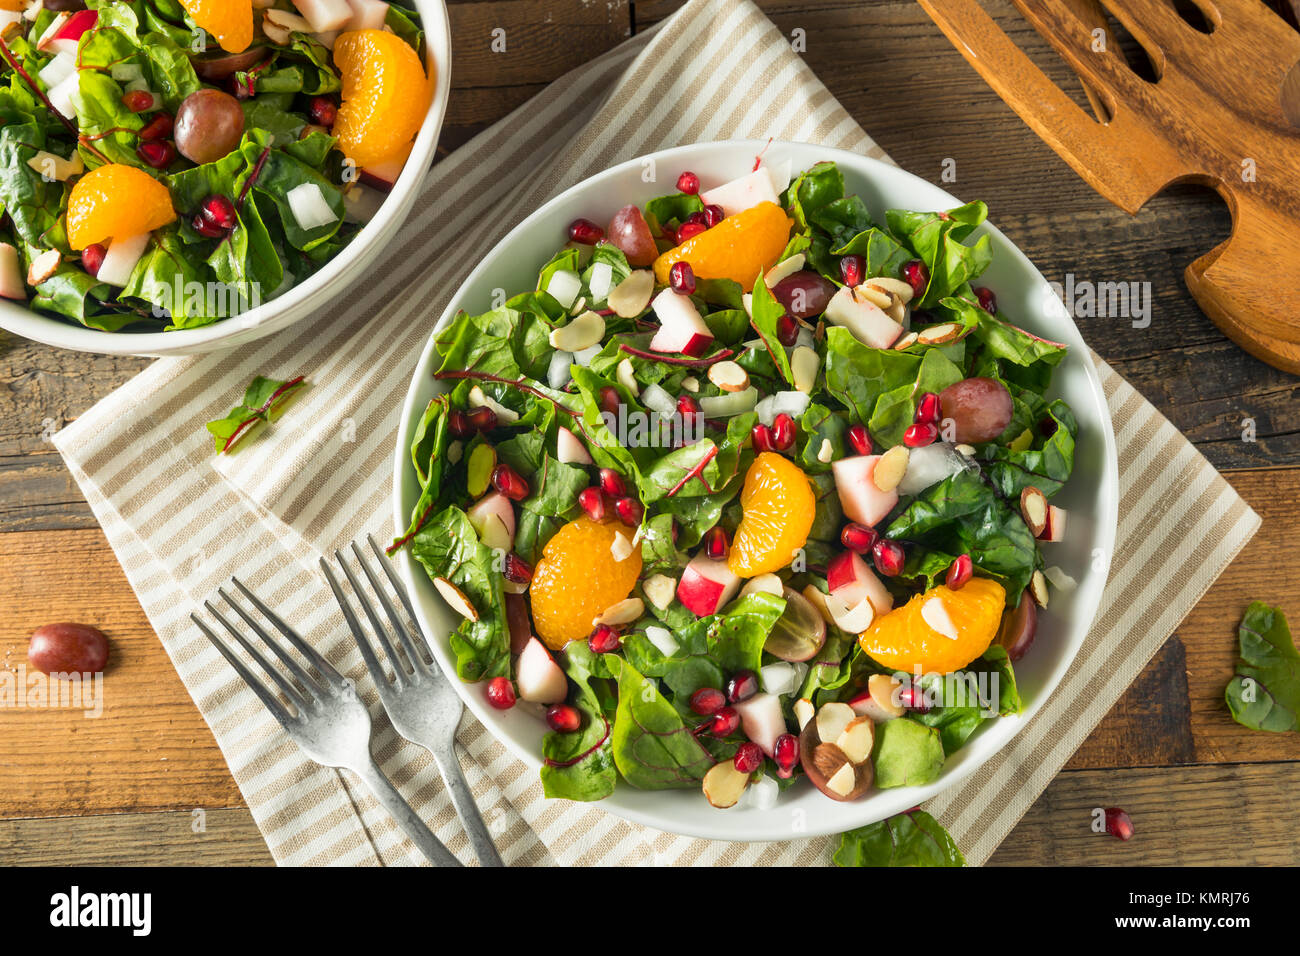 Raw Organic Winter Chard Salad with Oranges Almonds and Apples Stock Photo